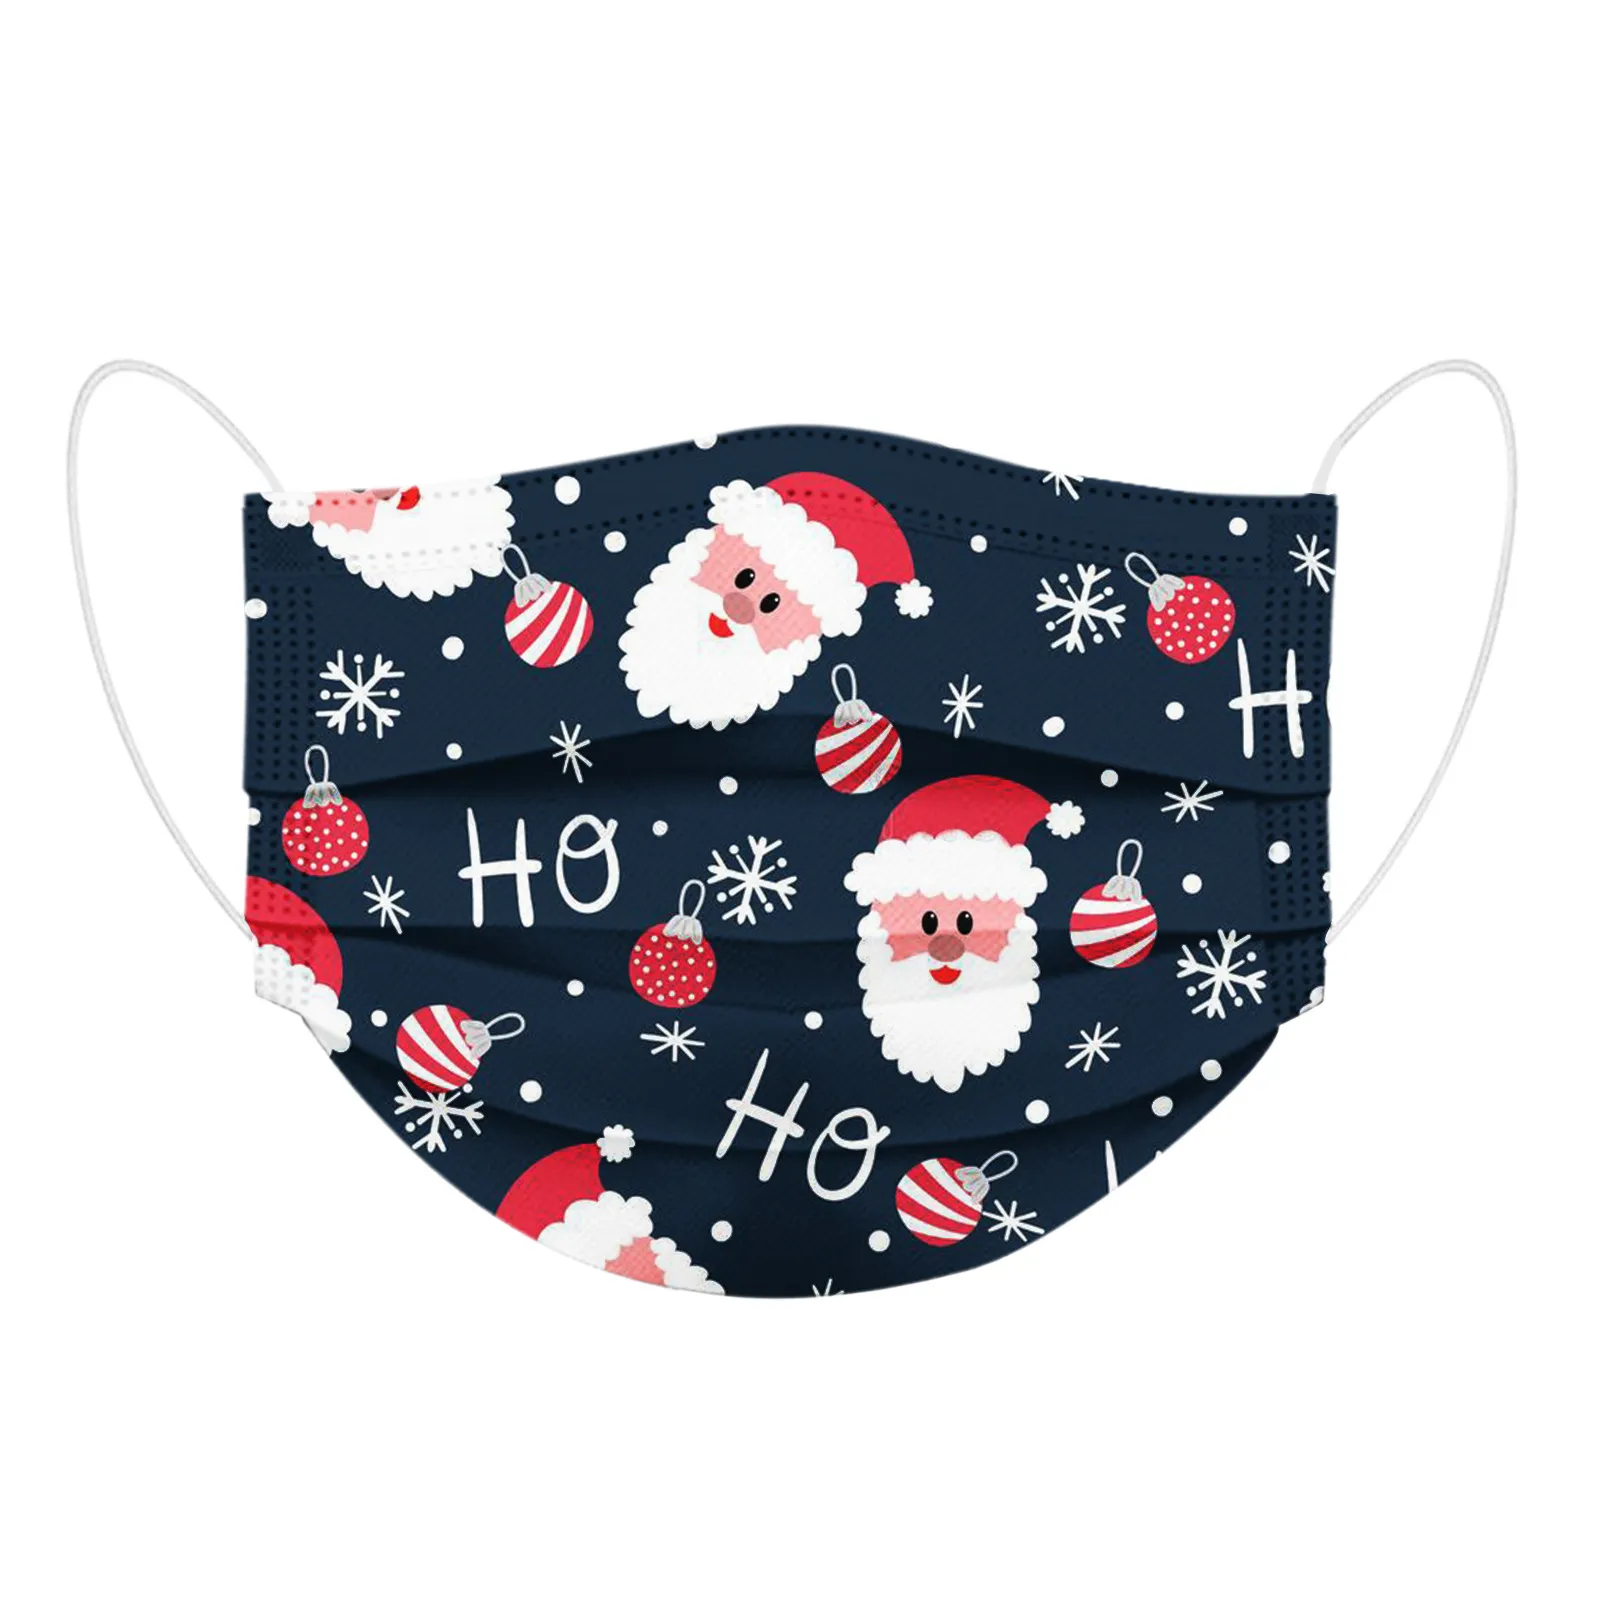 2021 Designer Face Mask Christmas disposable masks cartoon snowman cute children three-layer protective dust cover in stock